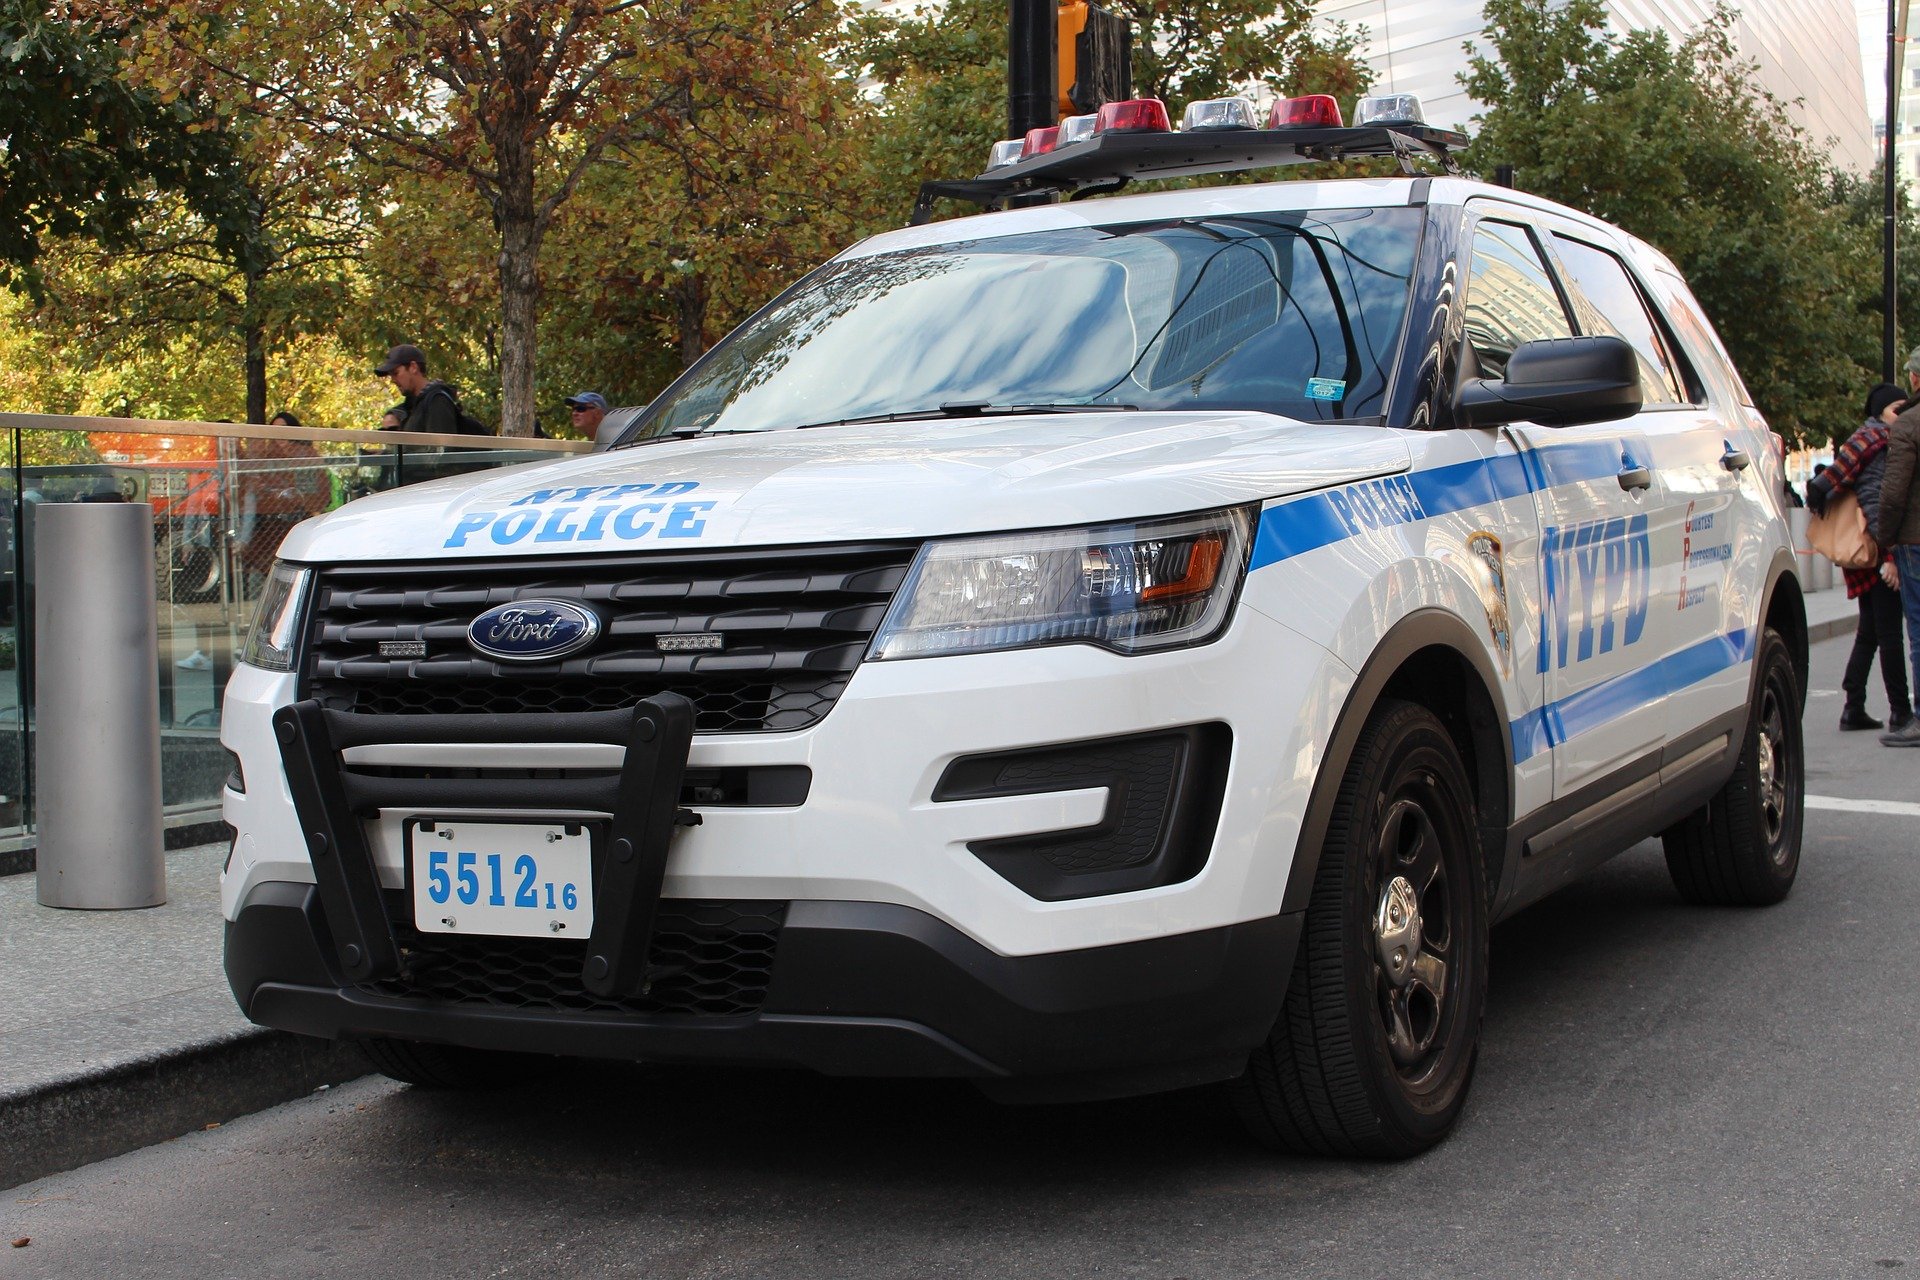 Pictured - New York Police vehicle | Source: Pixabay